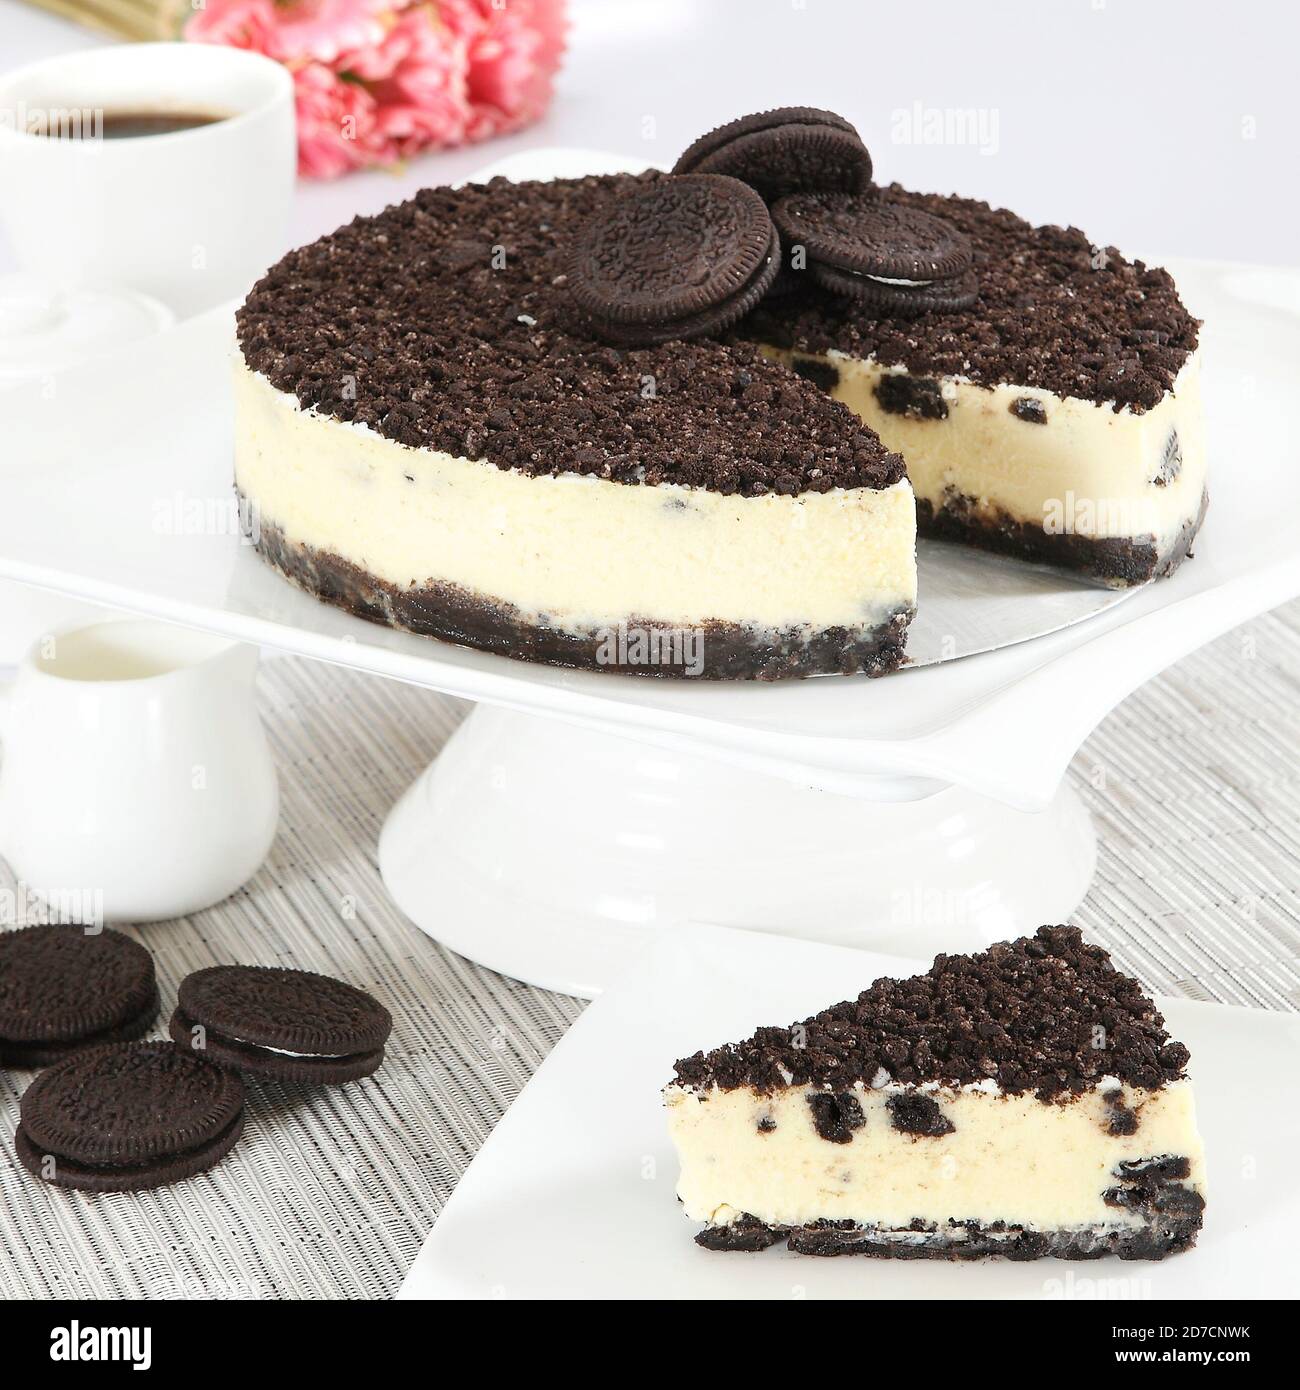 Oreo Cheesecake High Resolution Stock Photography and Images - Alamy